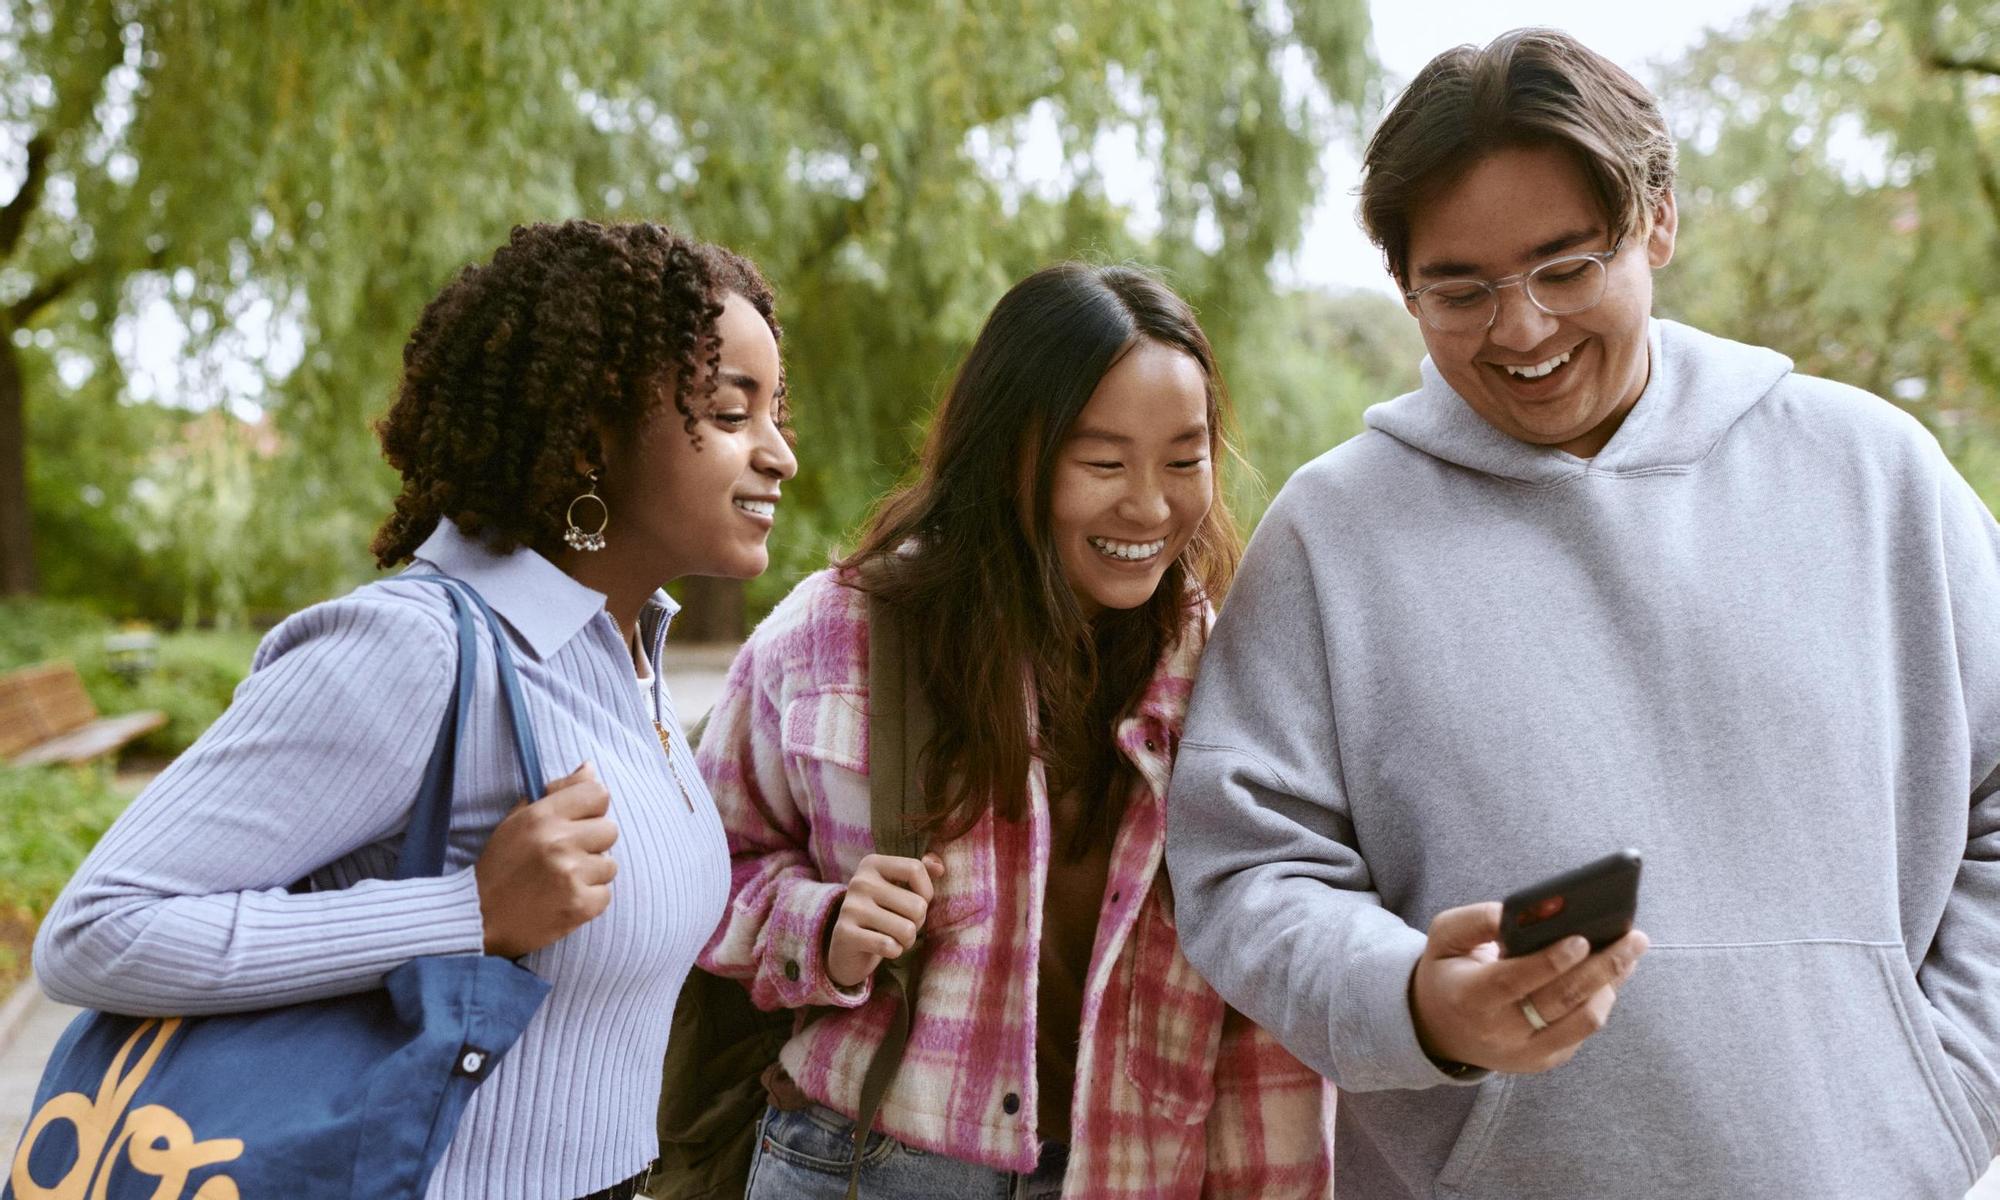 Young adults laughing at something on a mobile